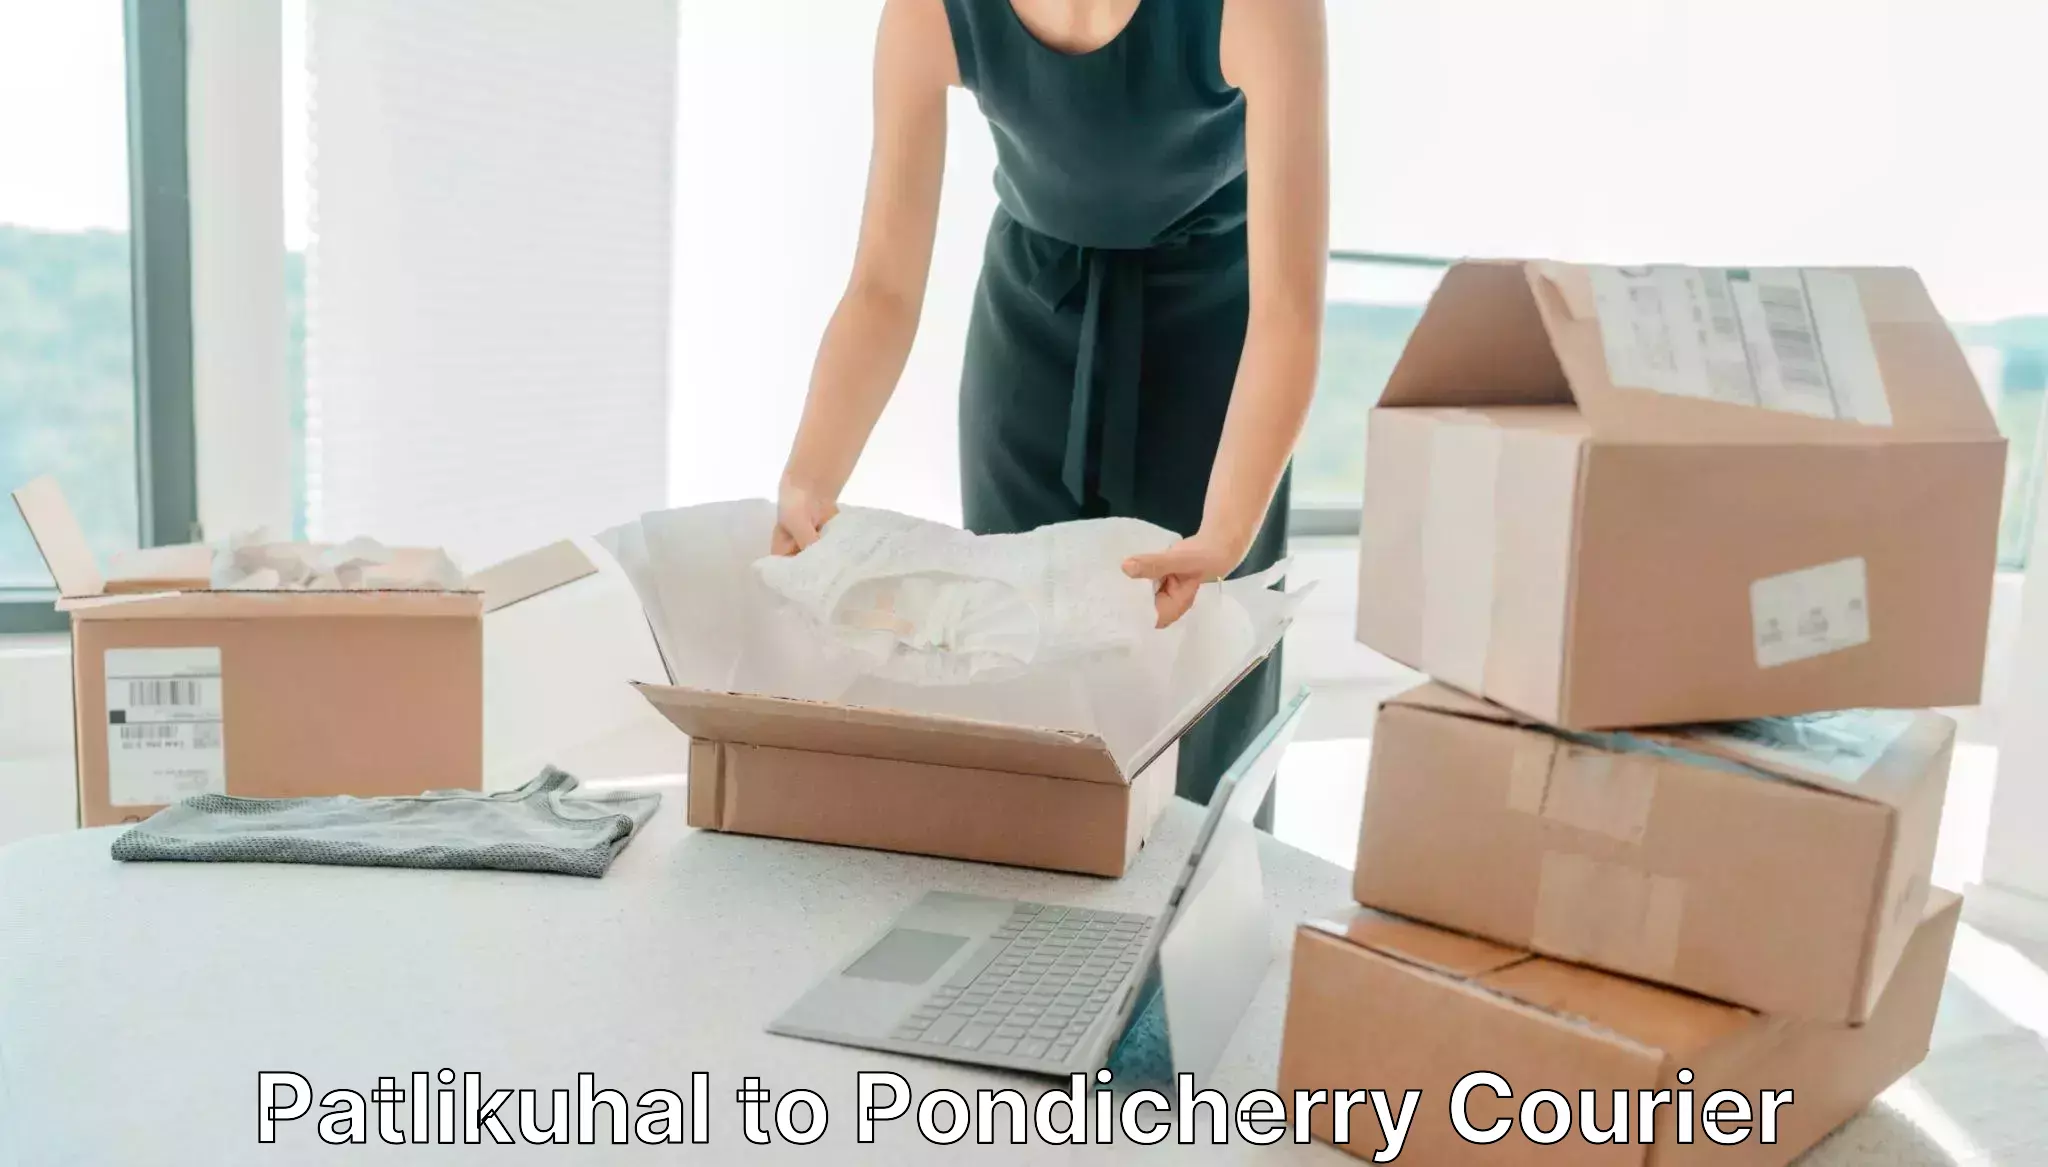 Reliable package handling Patlikuhal to Pondicherry University